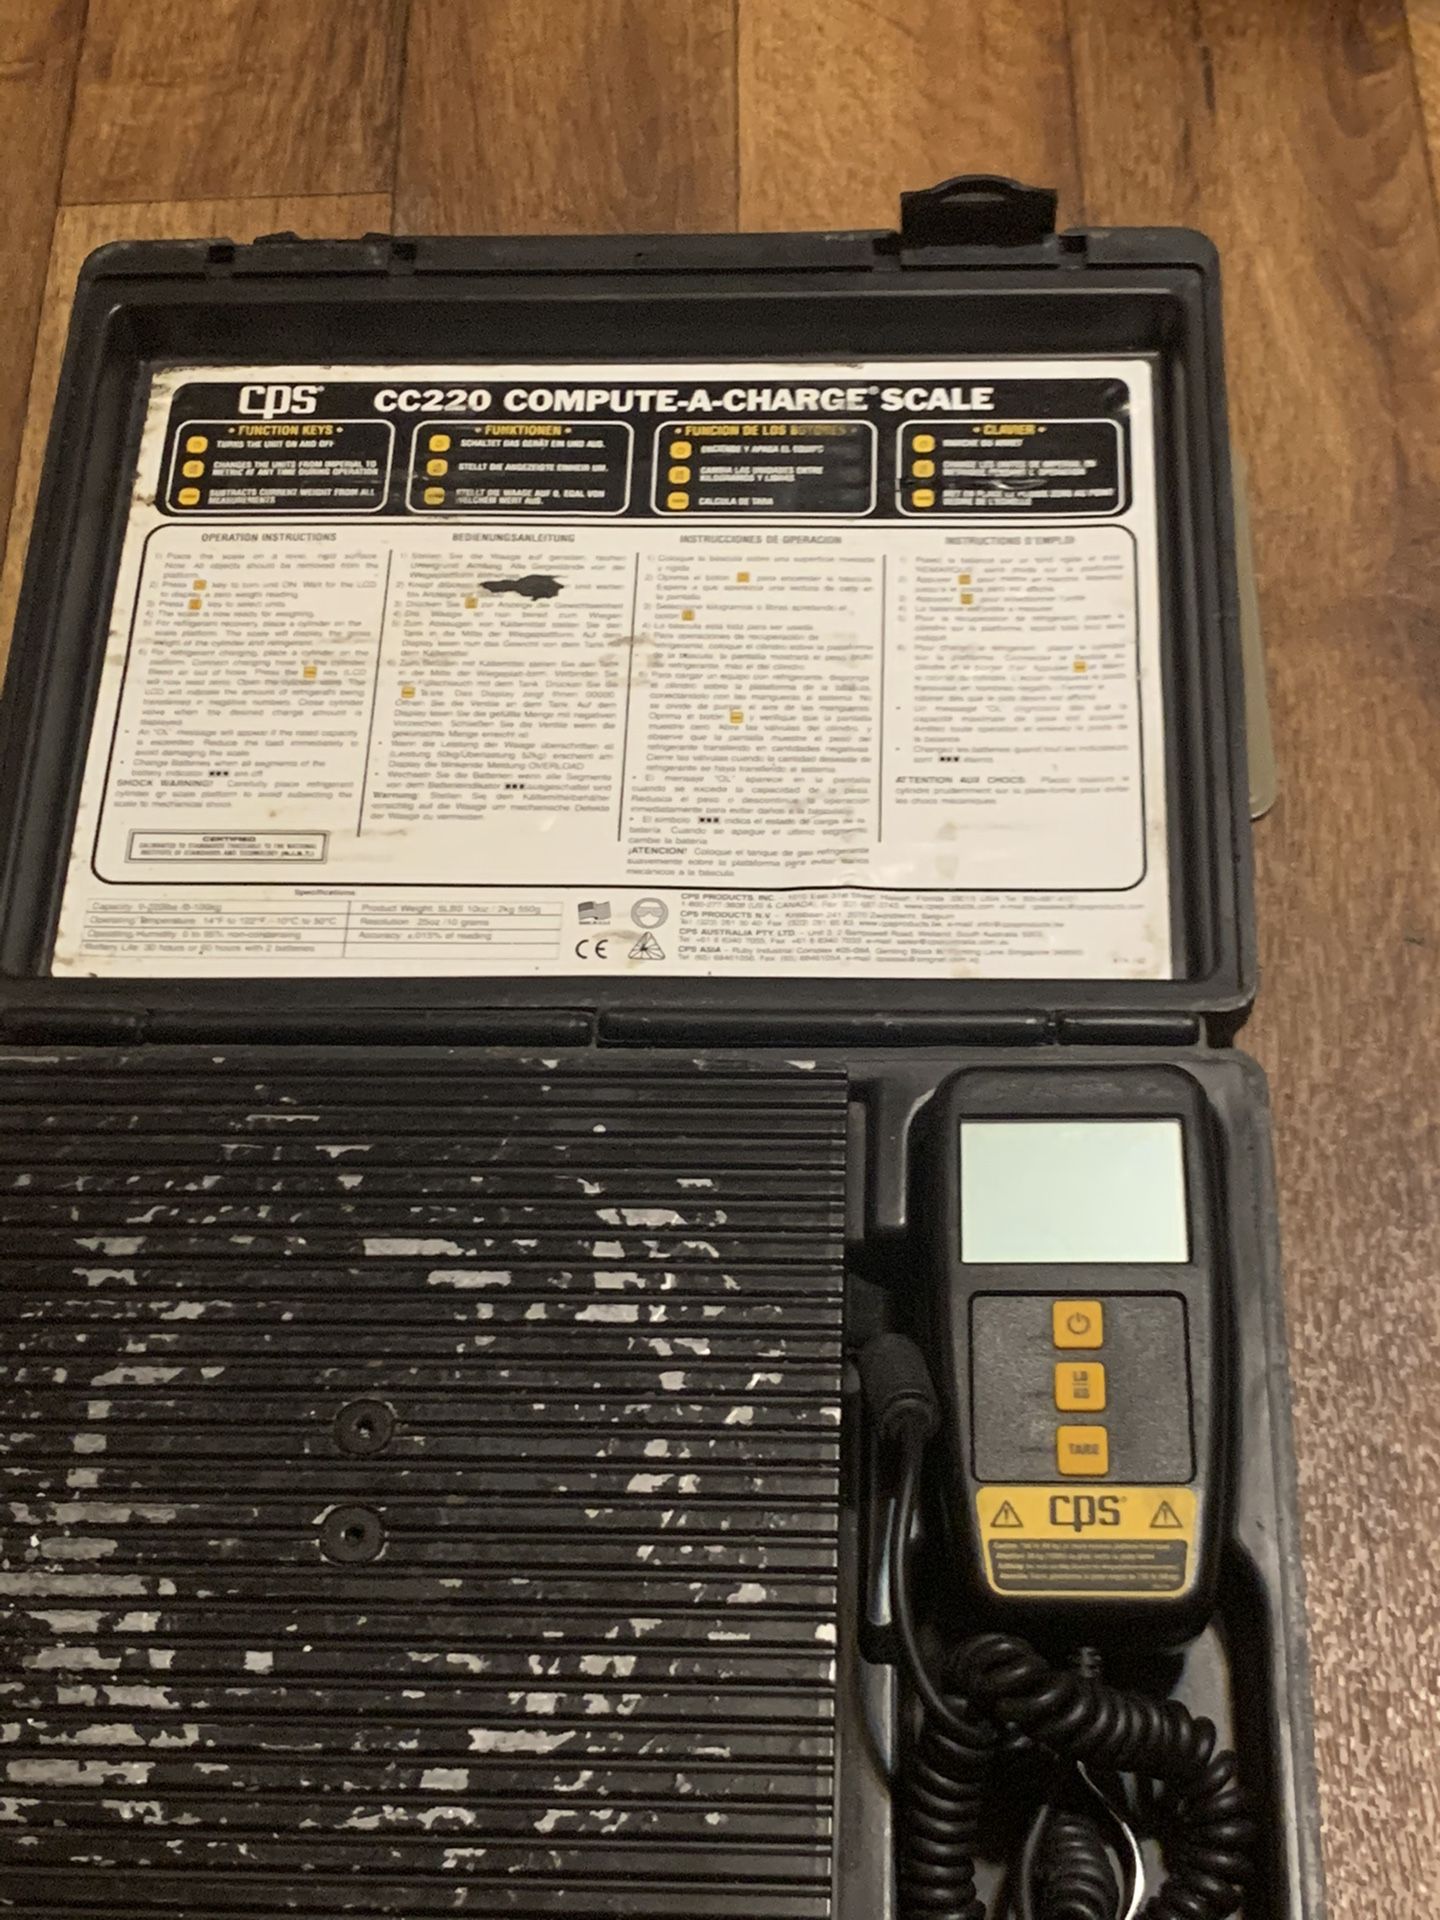 HVAC tools cps c220 compute-A charge scale asking 150.00 or best offer